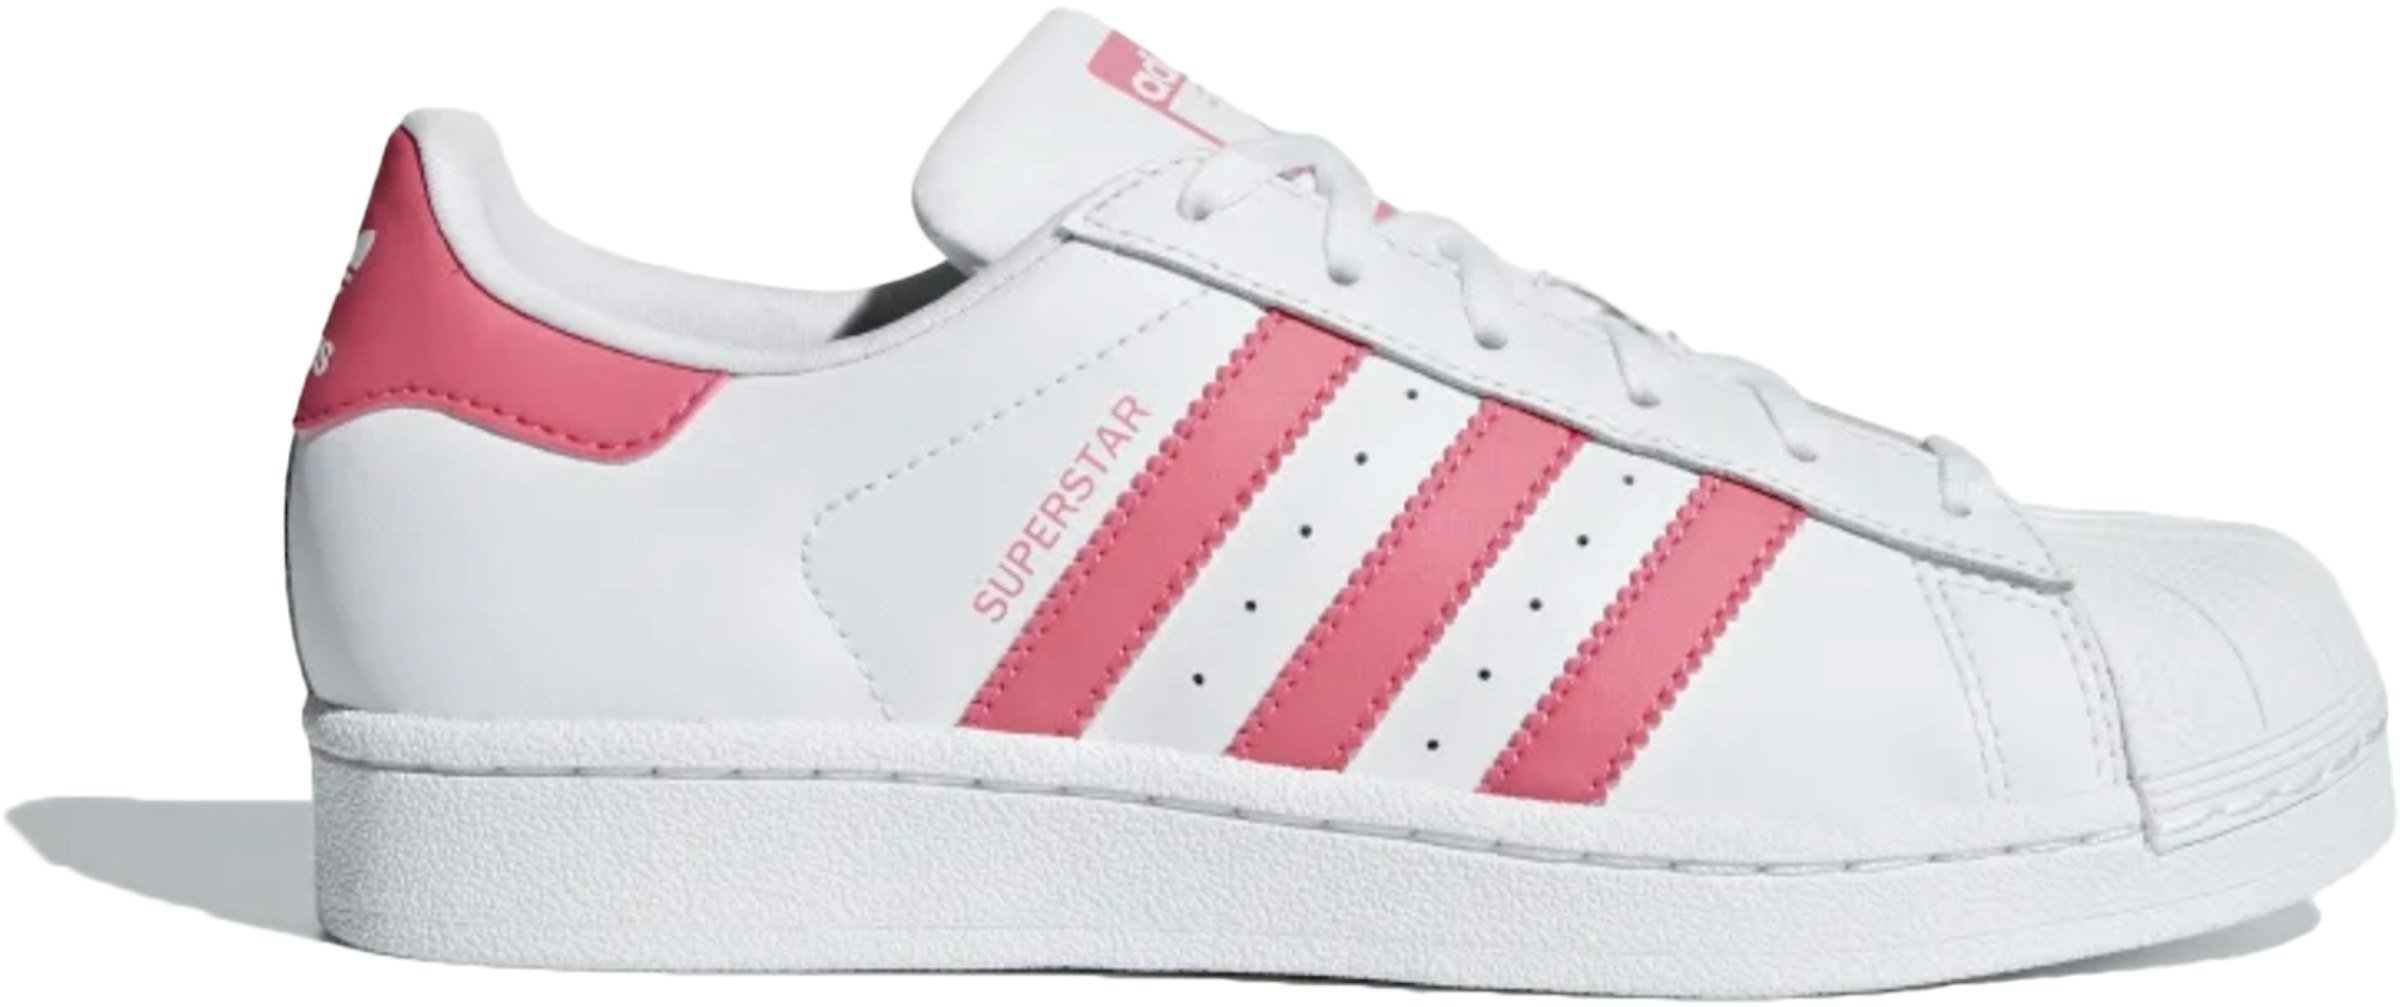 adidas Superstar White Real Pink (GS) - - US